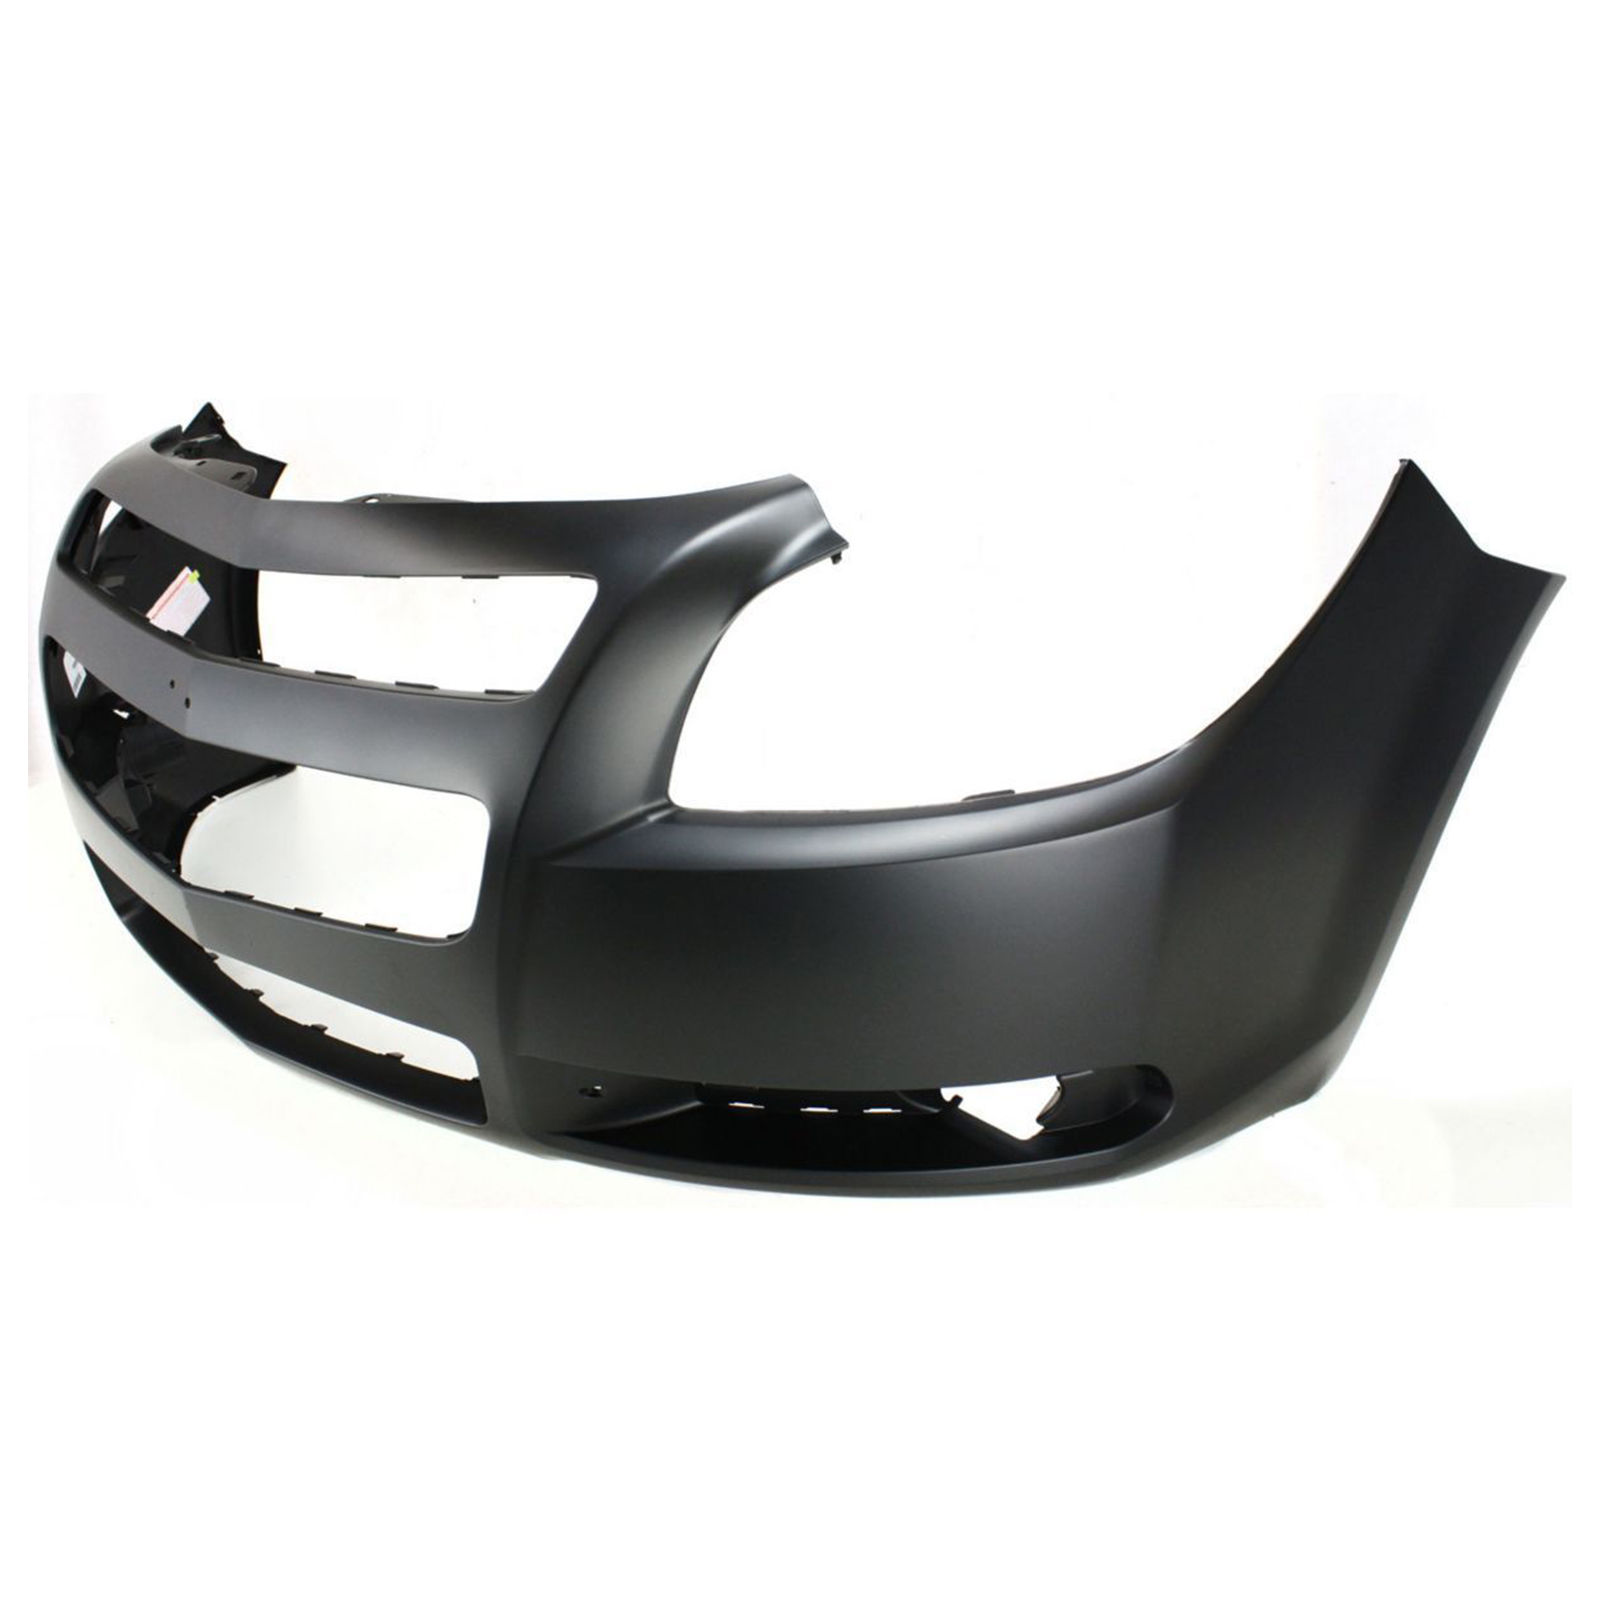 2008-2012 CHEVY MALIBU Front Bumper Cover w/o Emblem Painted to Match